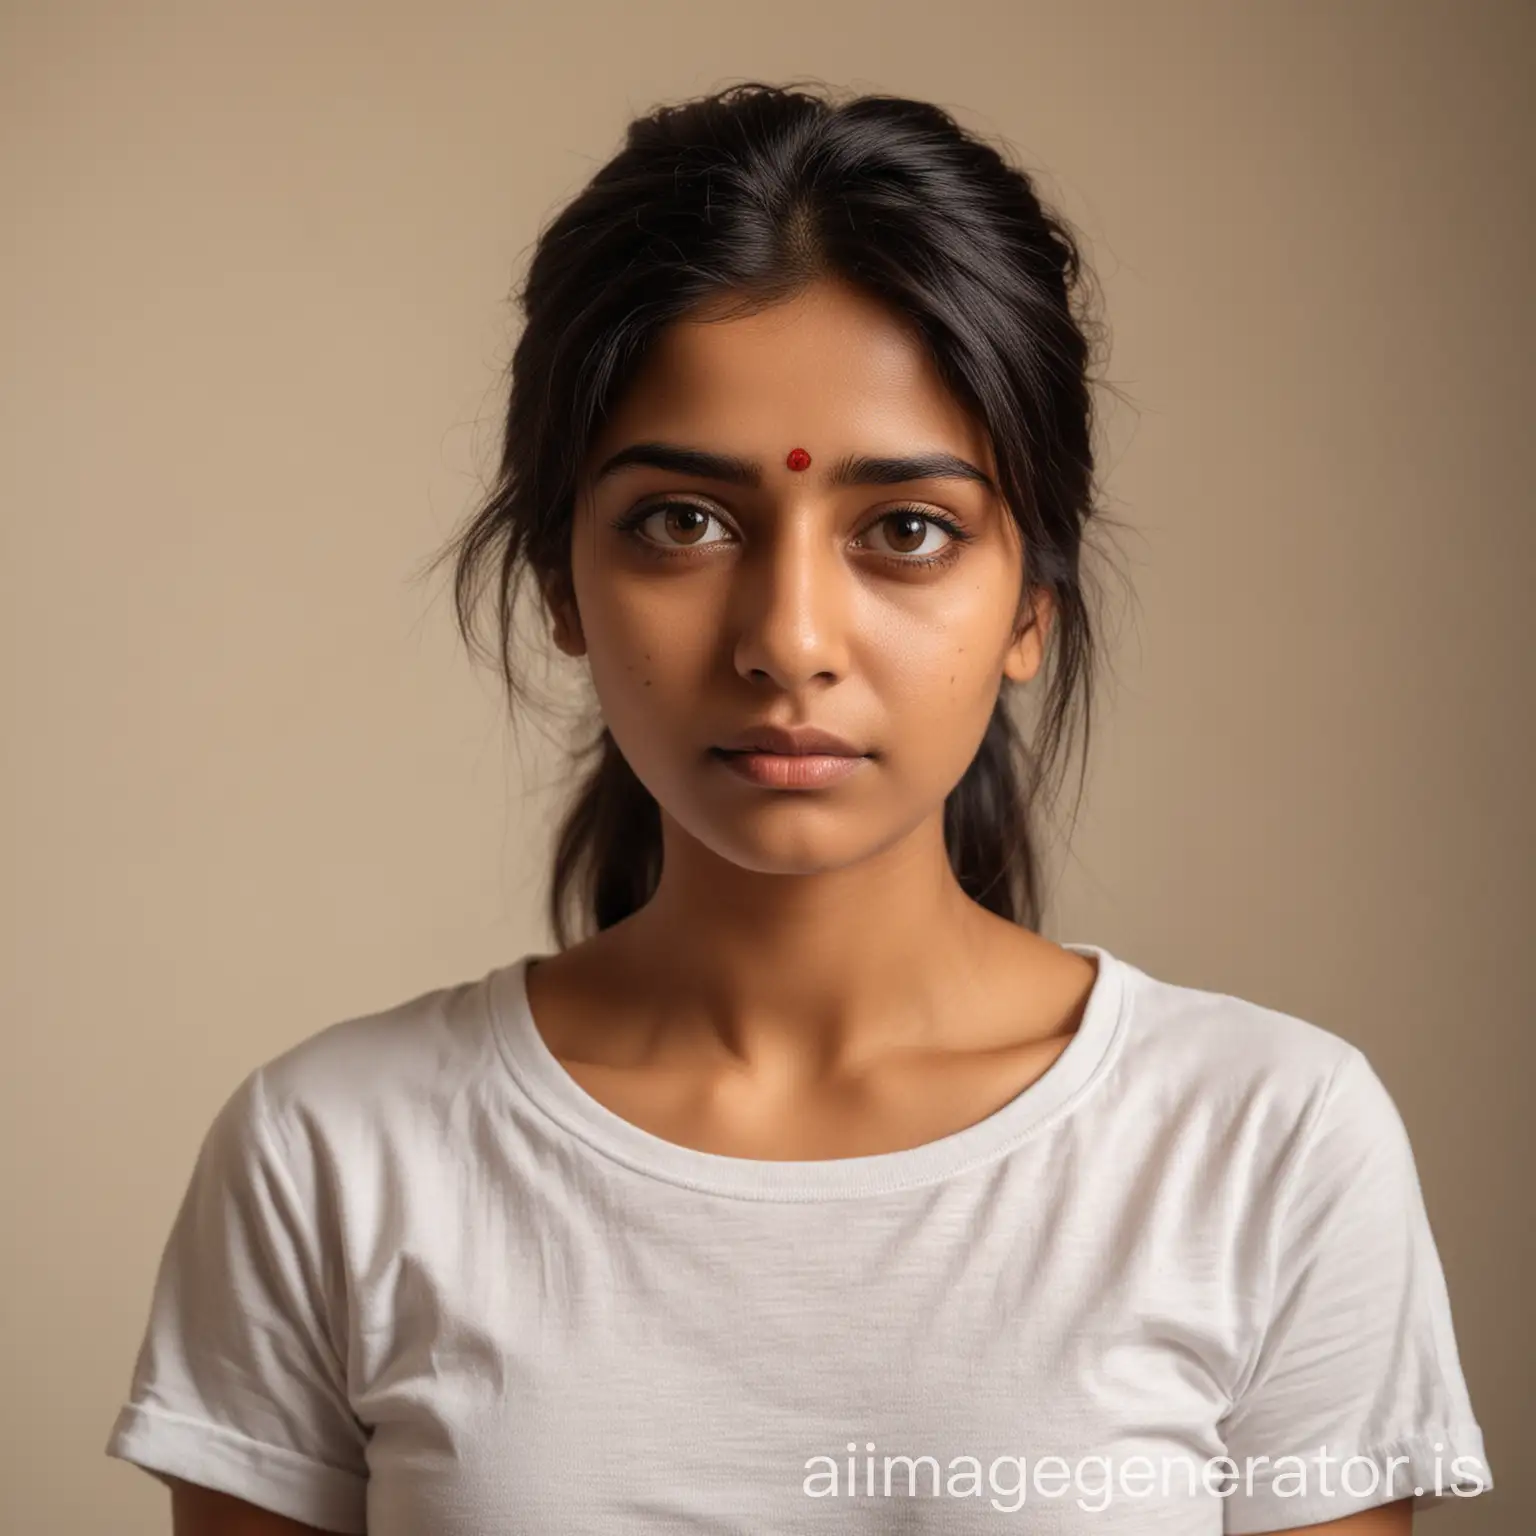 Indian-Woman-in-Casual-TShirt-with-Sad-Brown-Eyes